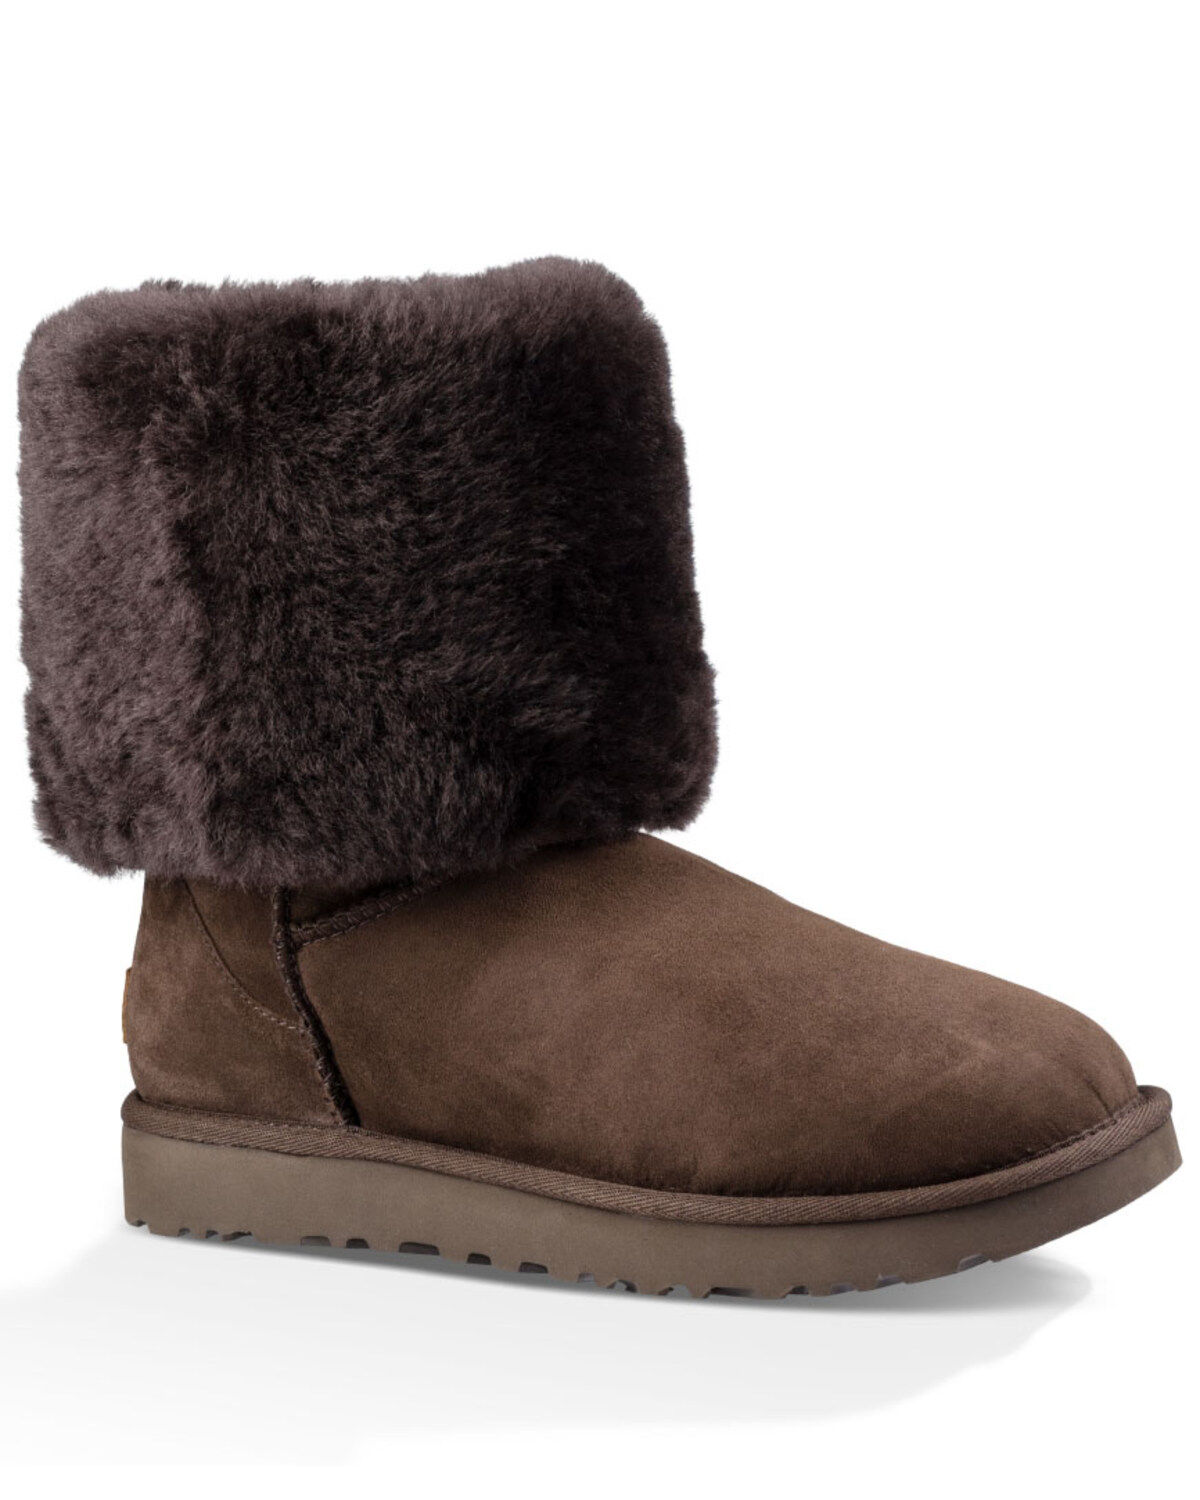 tall uggs with fur on outside